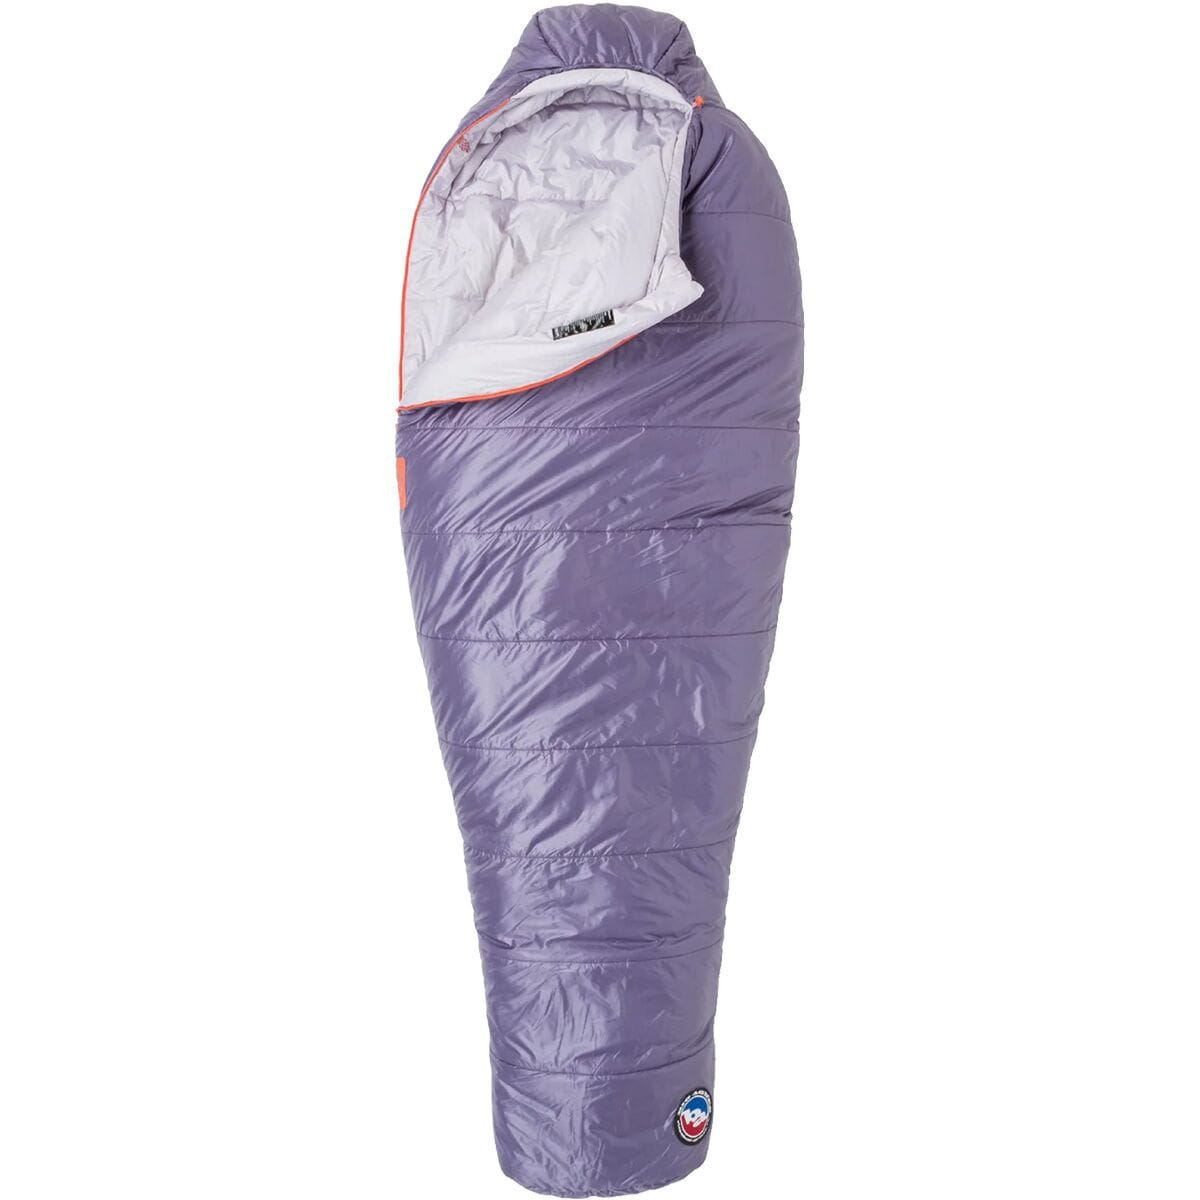 Anthracite 20 FireLine Pro Recycled Sleeping Bag - Women